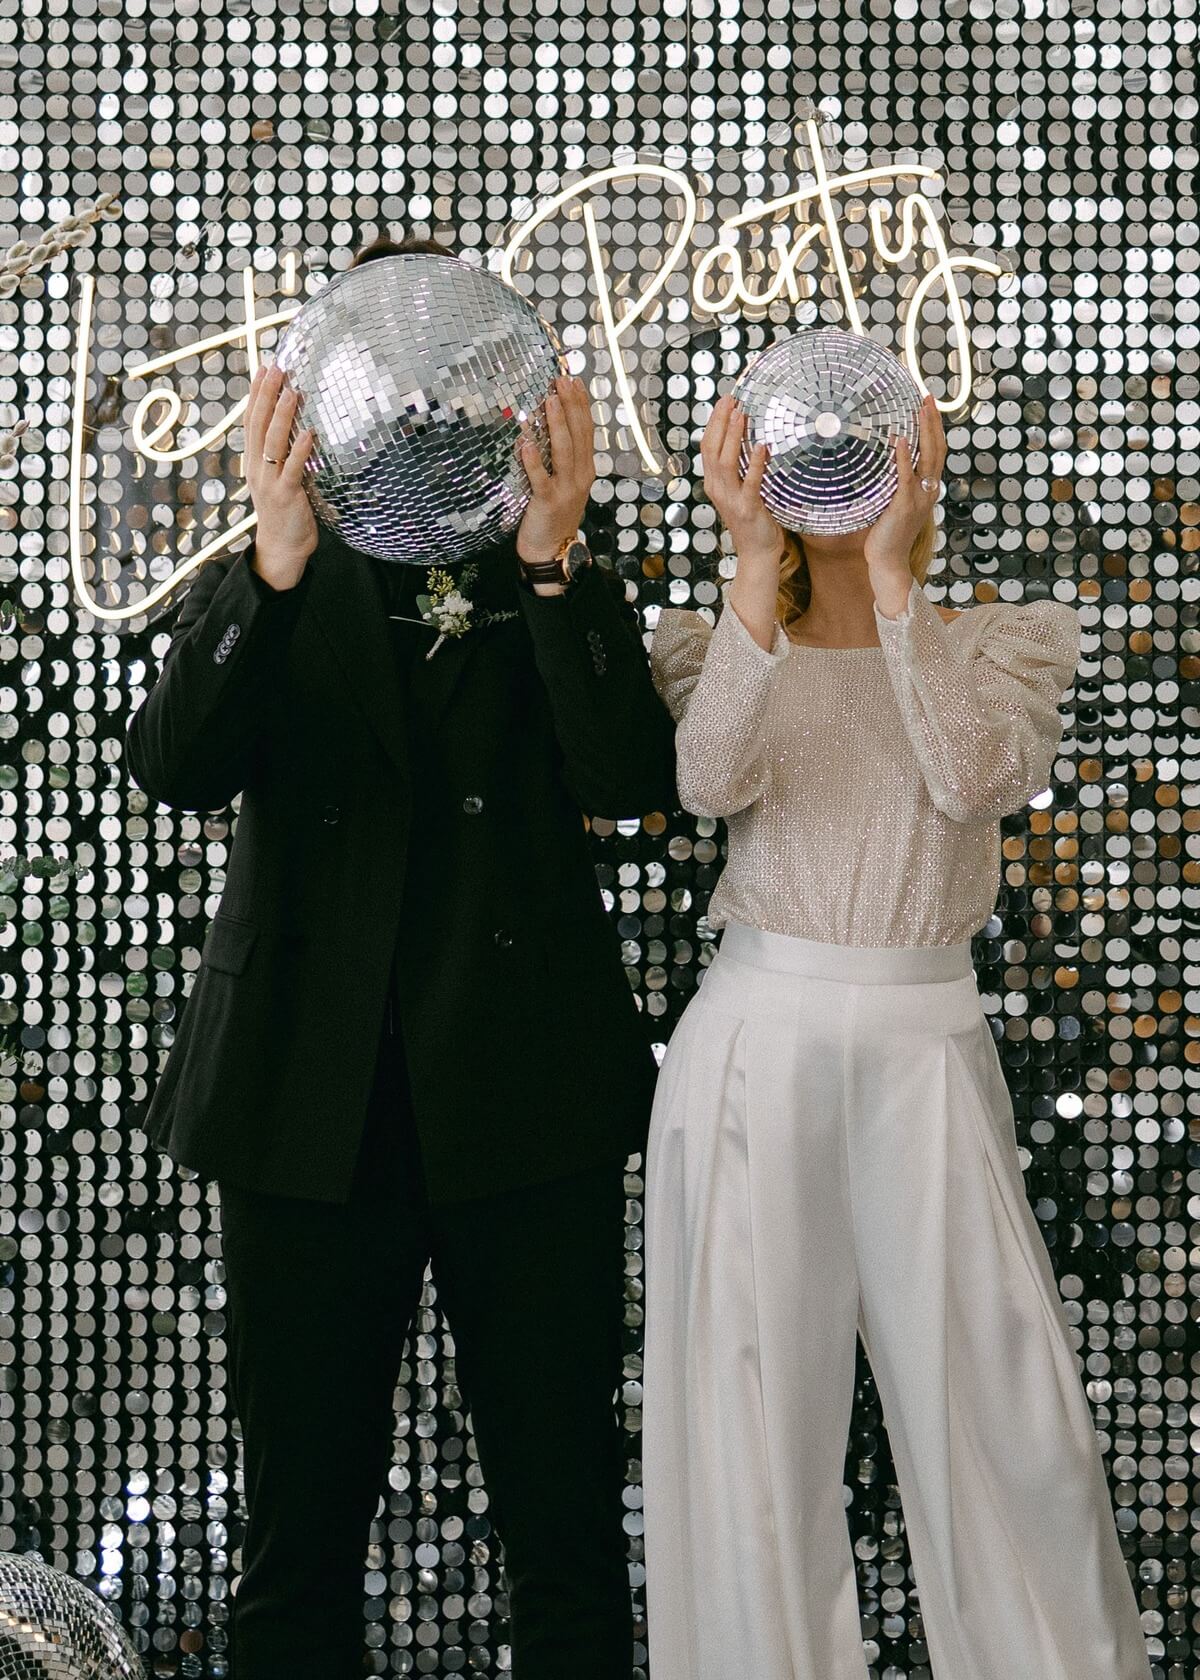 Bride and groom hold disco balls in front of their faces at a stylish wedding party with a glittering backdrop and a 'Let's Party' neon sign